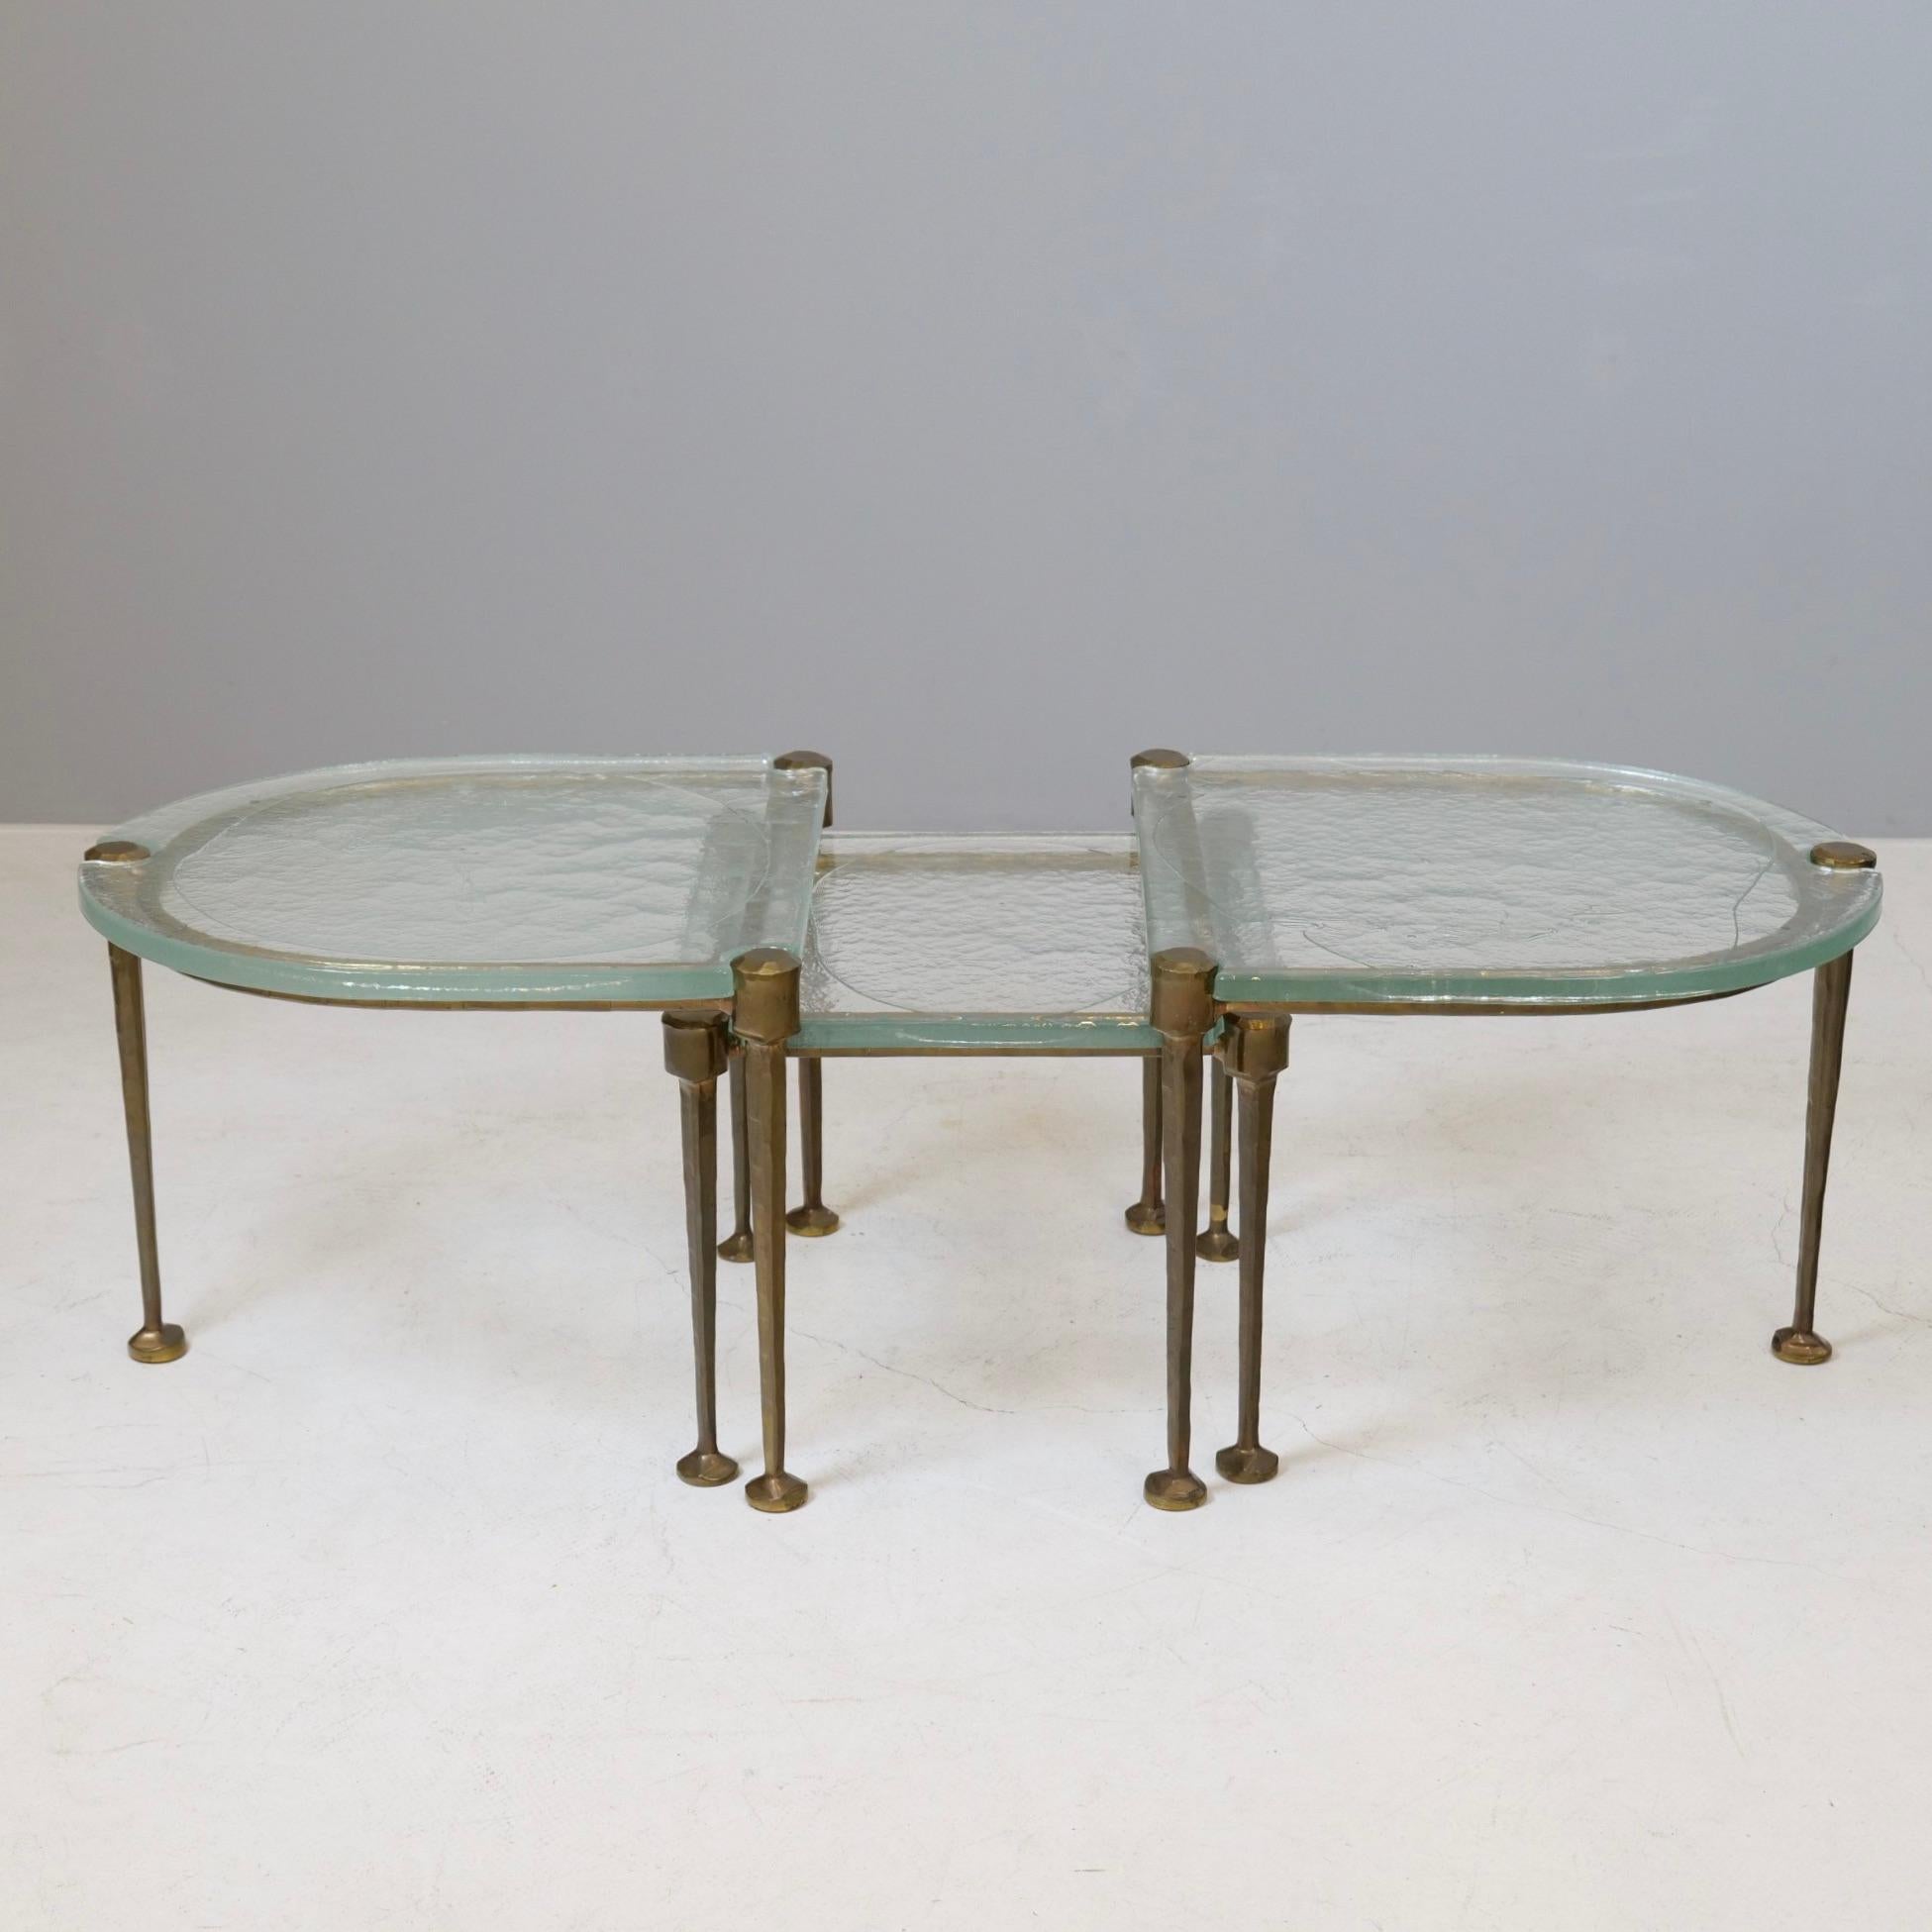 Brutalist tables made of forged bronze and cast glass from the 1980s This forging process of bronze is a bronze alloy developed by Lothar Klute.

In modern times, the production of such tables would be impossible for reasons of cost and